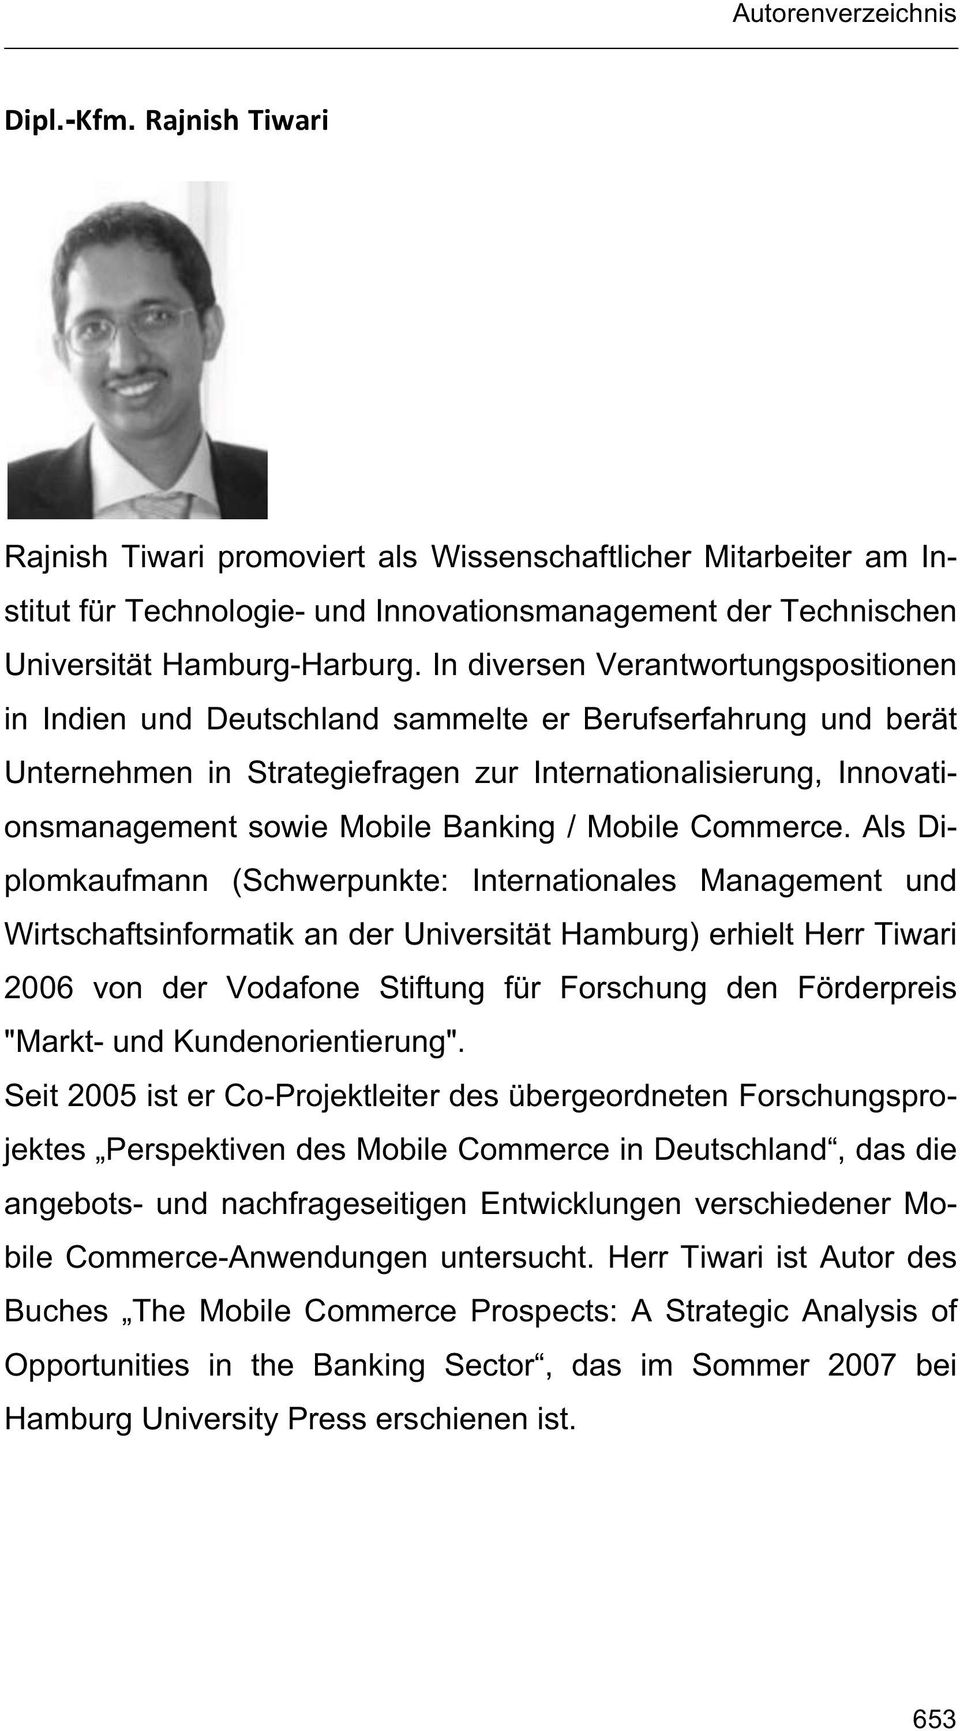 Banking / Mobile Commerce.